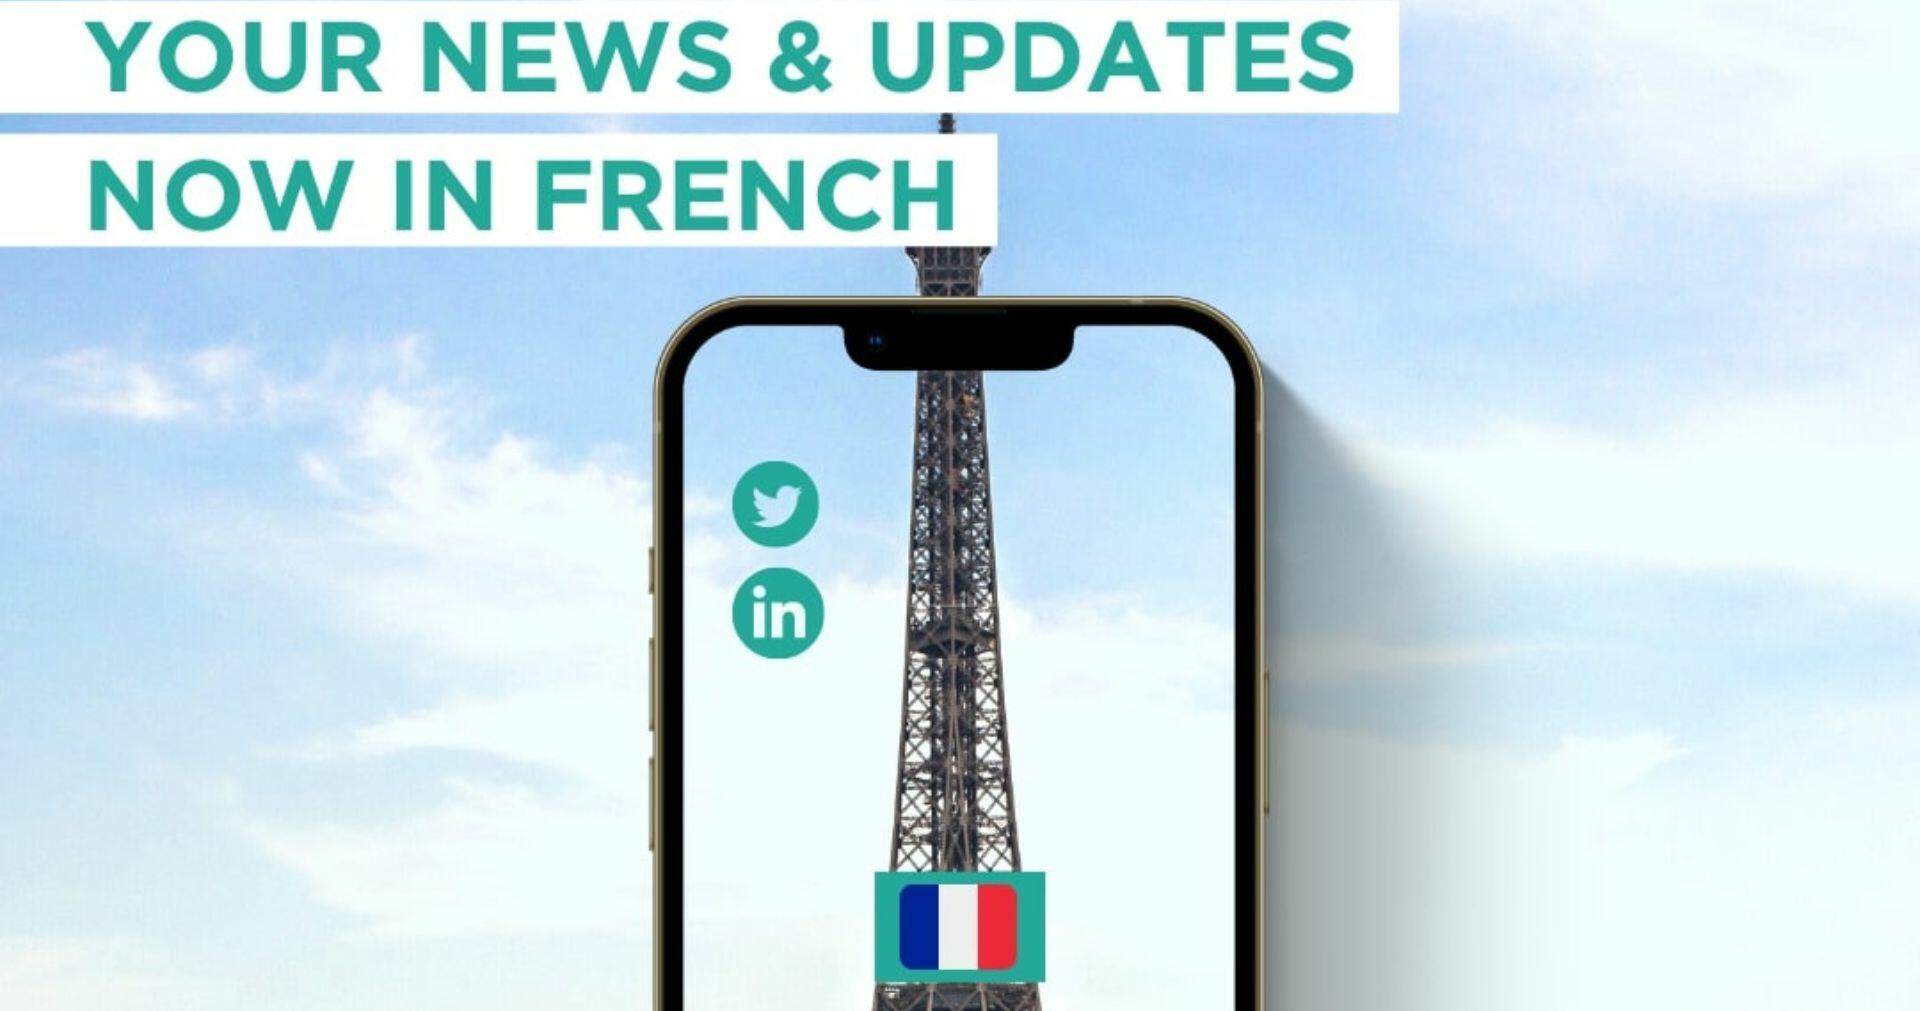 CHANGENOW LAUNCHING LINKEDIN & TWITTER IN FRENCH